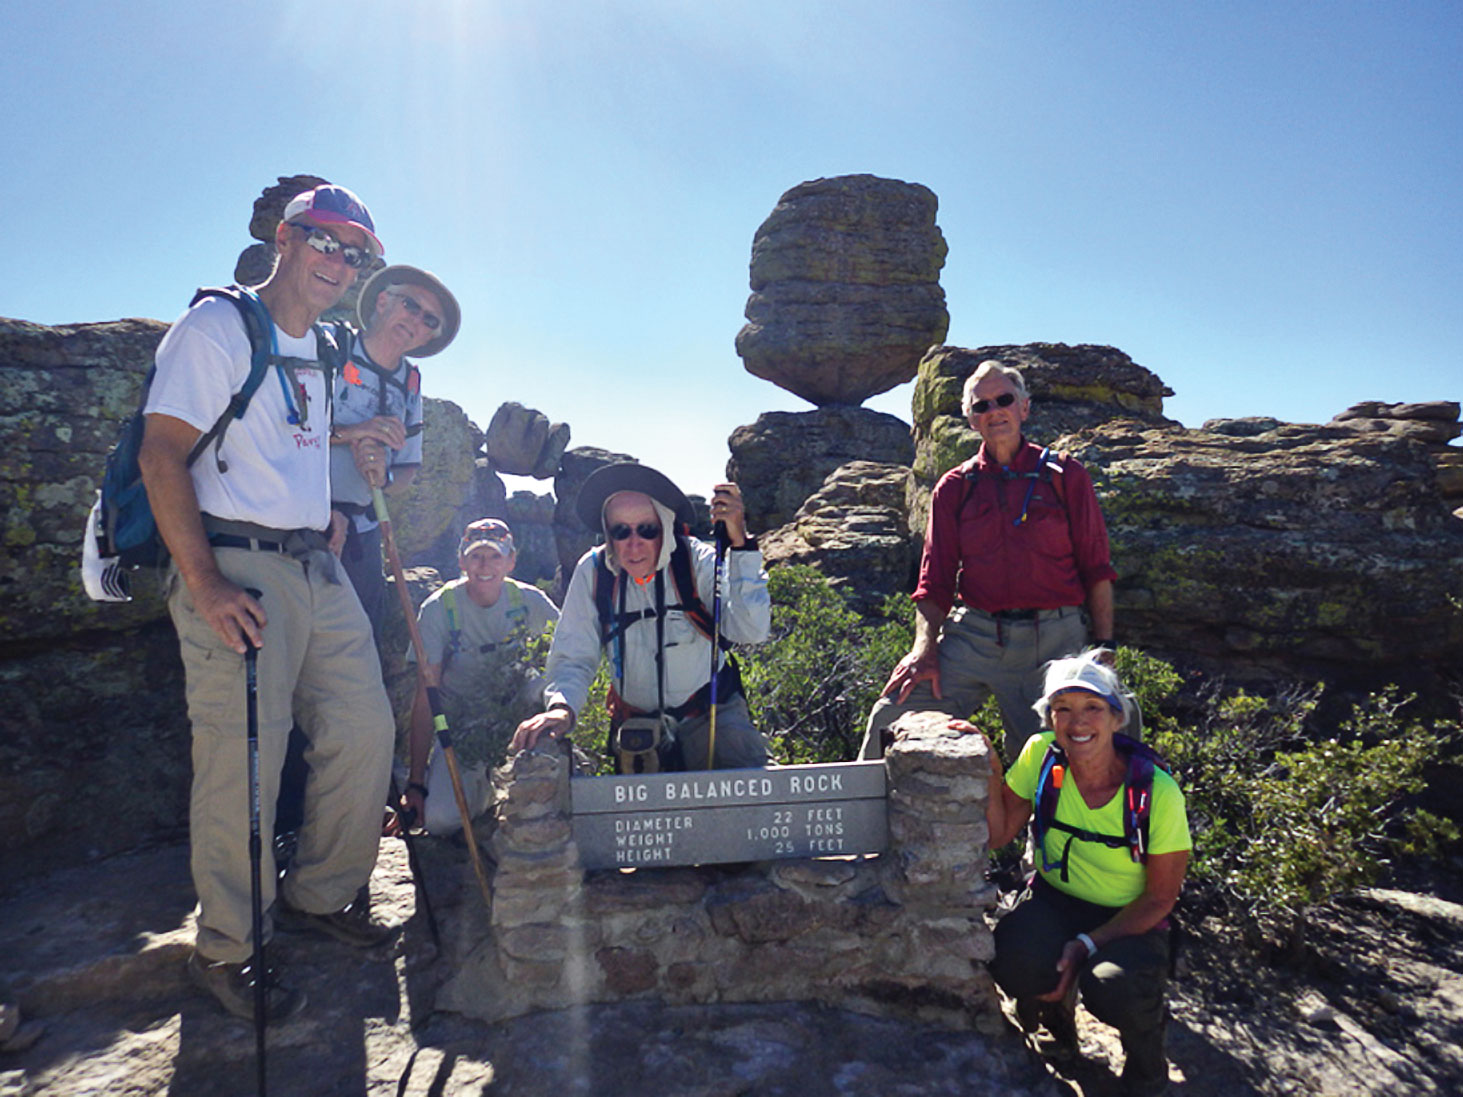 At the Big Balanced Rock in the Heart of Rocks area of Chiricahua National Monument are, left to right: Larry Linderman, Joe and Joyce Maurizzi, Aaron Schoenberg (guide), Niel Christenson and Jackie Hall; photo by Aaron Schoenberg